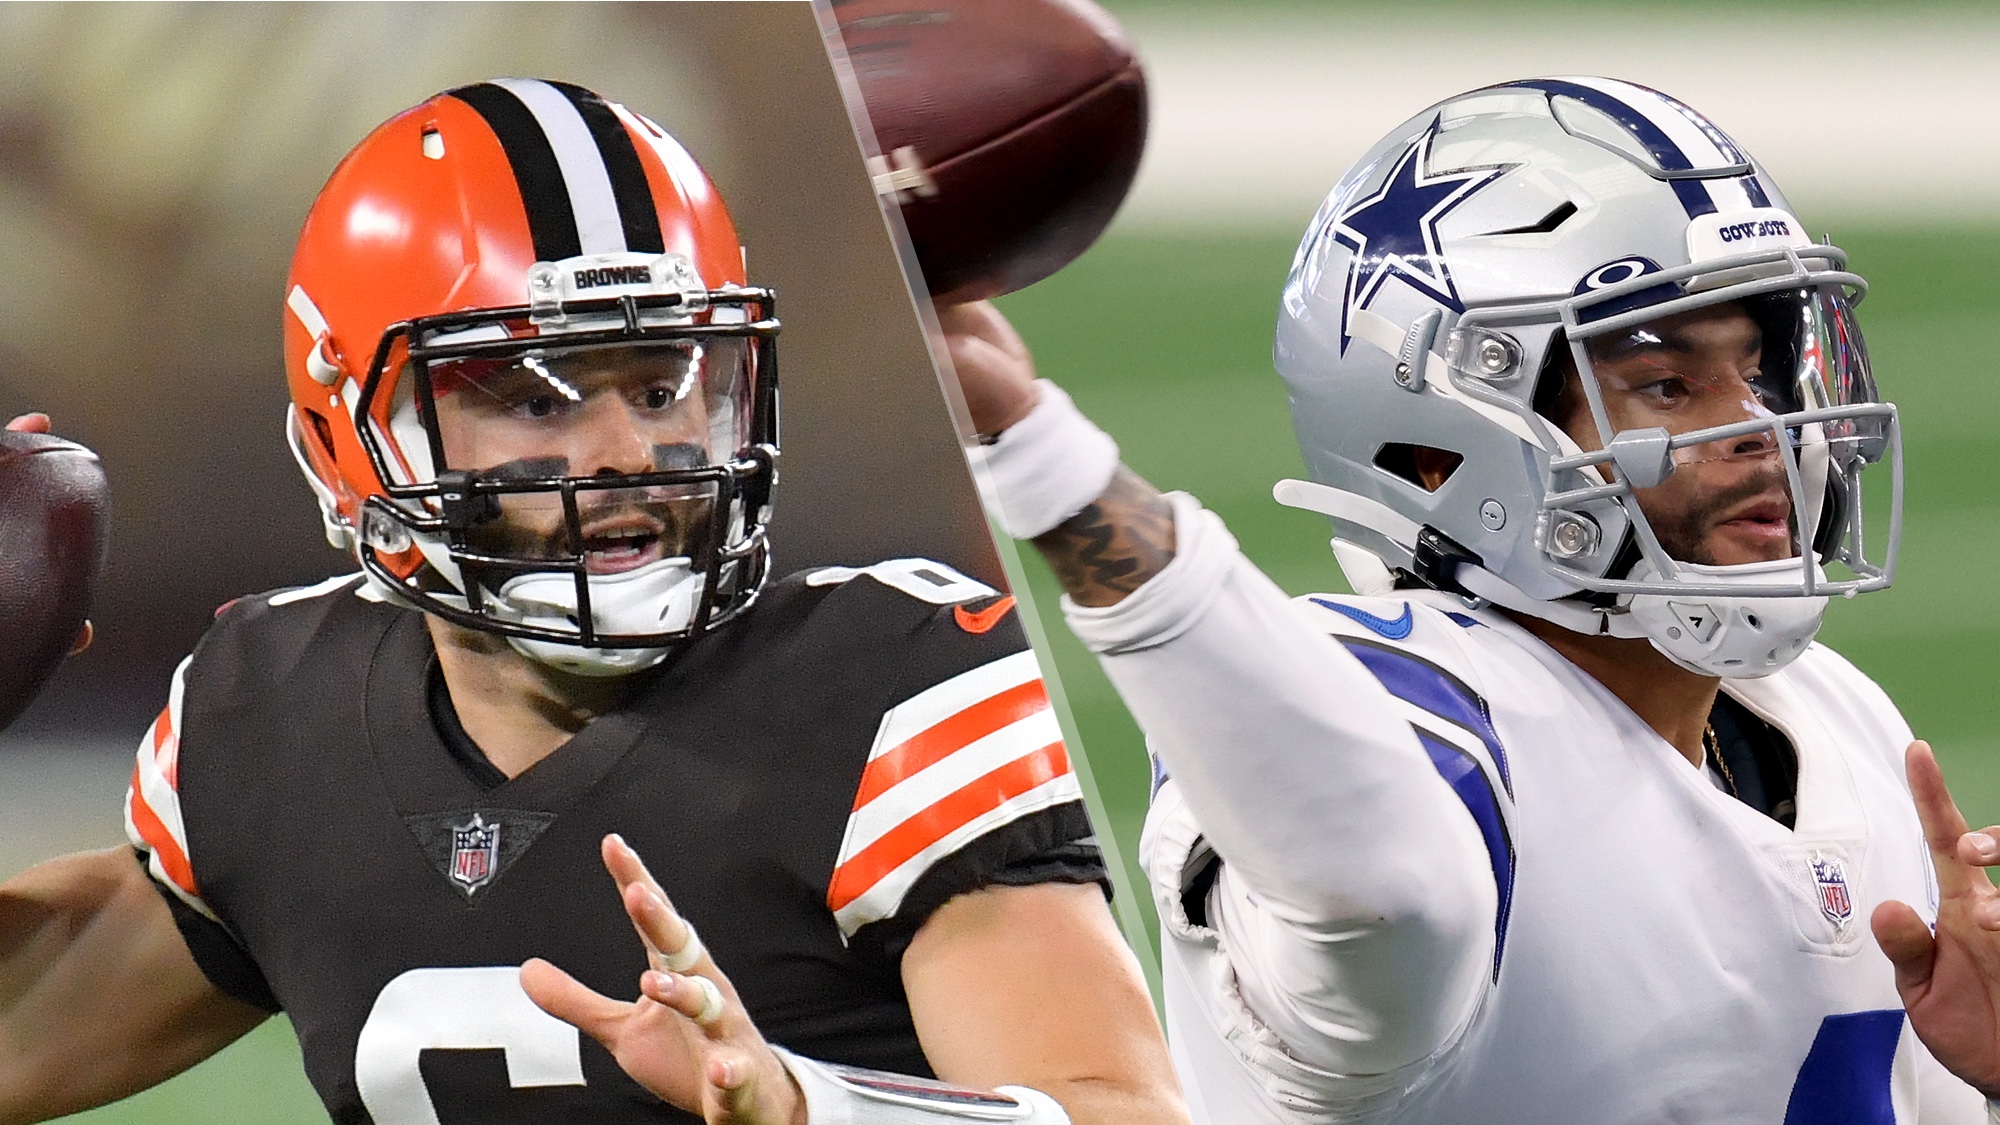 Browns vs Cowboys live stream How to watch NFL week 4 game online